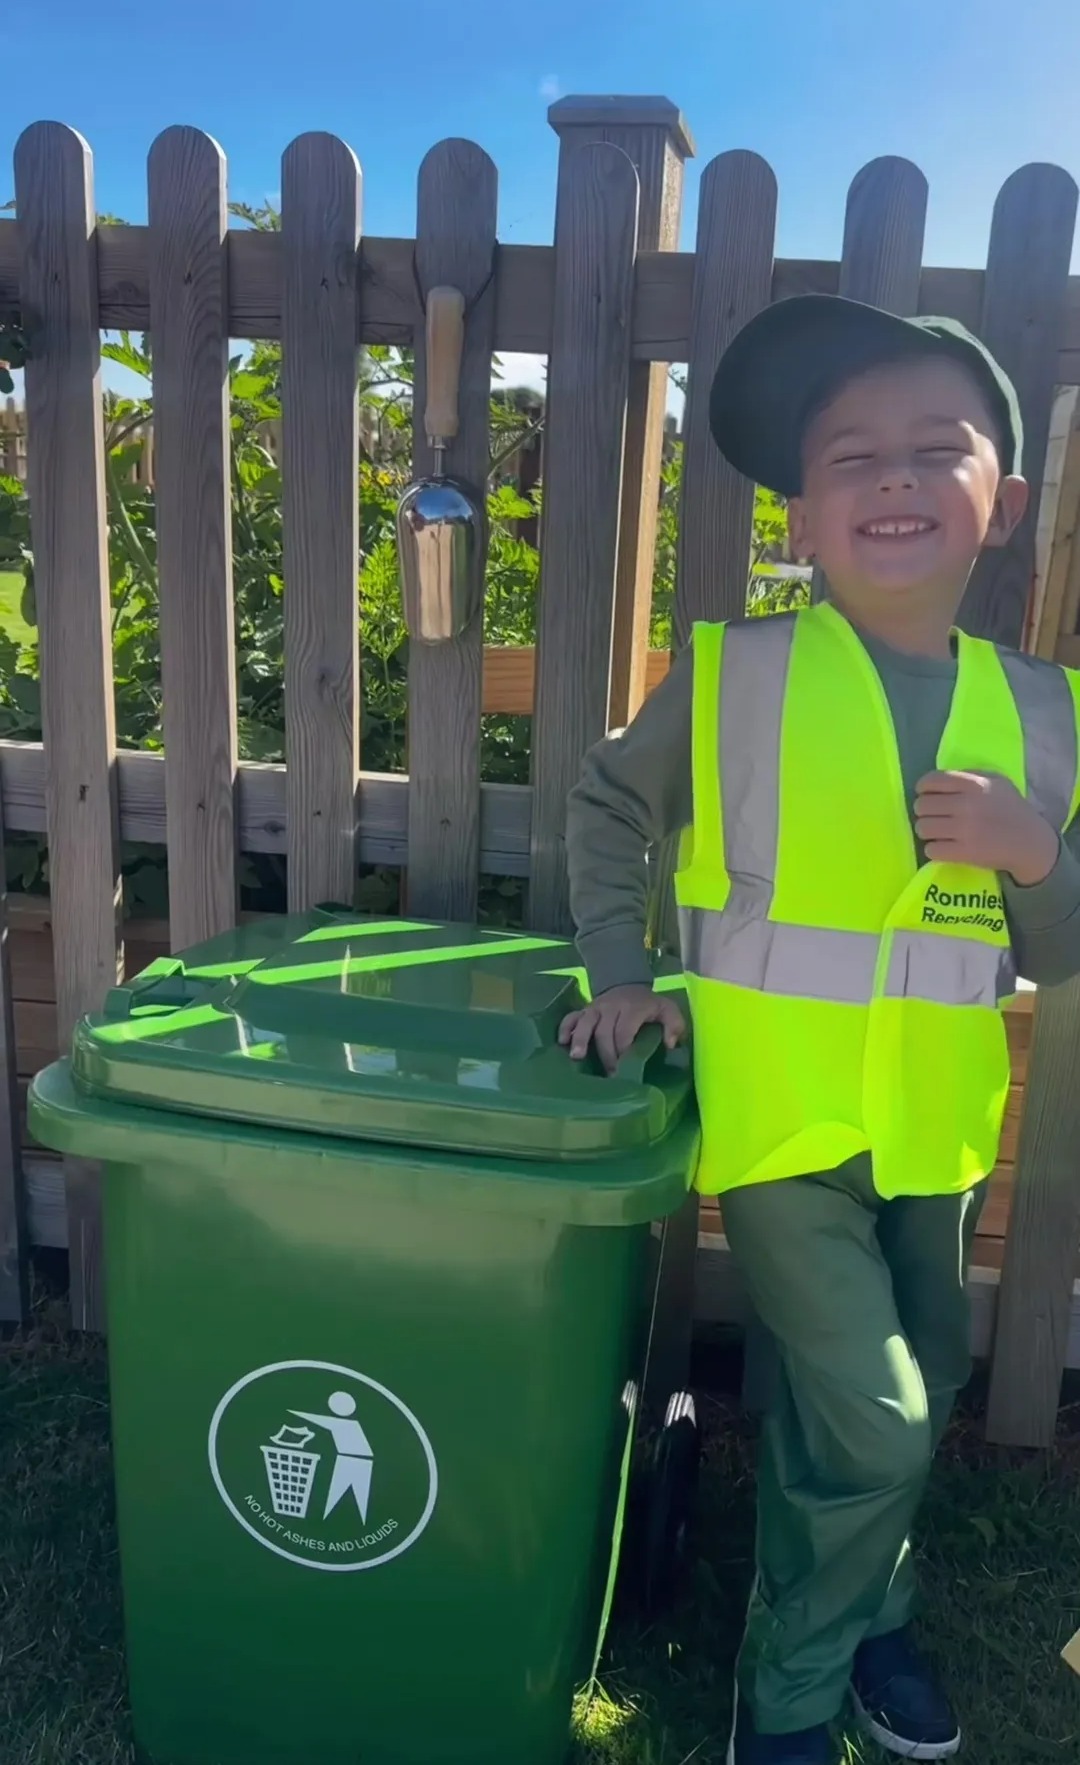 Rather than having a classic party with friends, the influencer made her youngsters' 'dreams come true' - as he was given an insight into what it's really like to be a bin man for the day